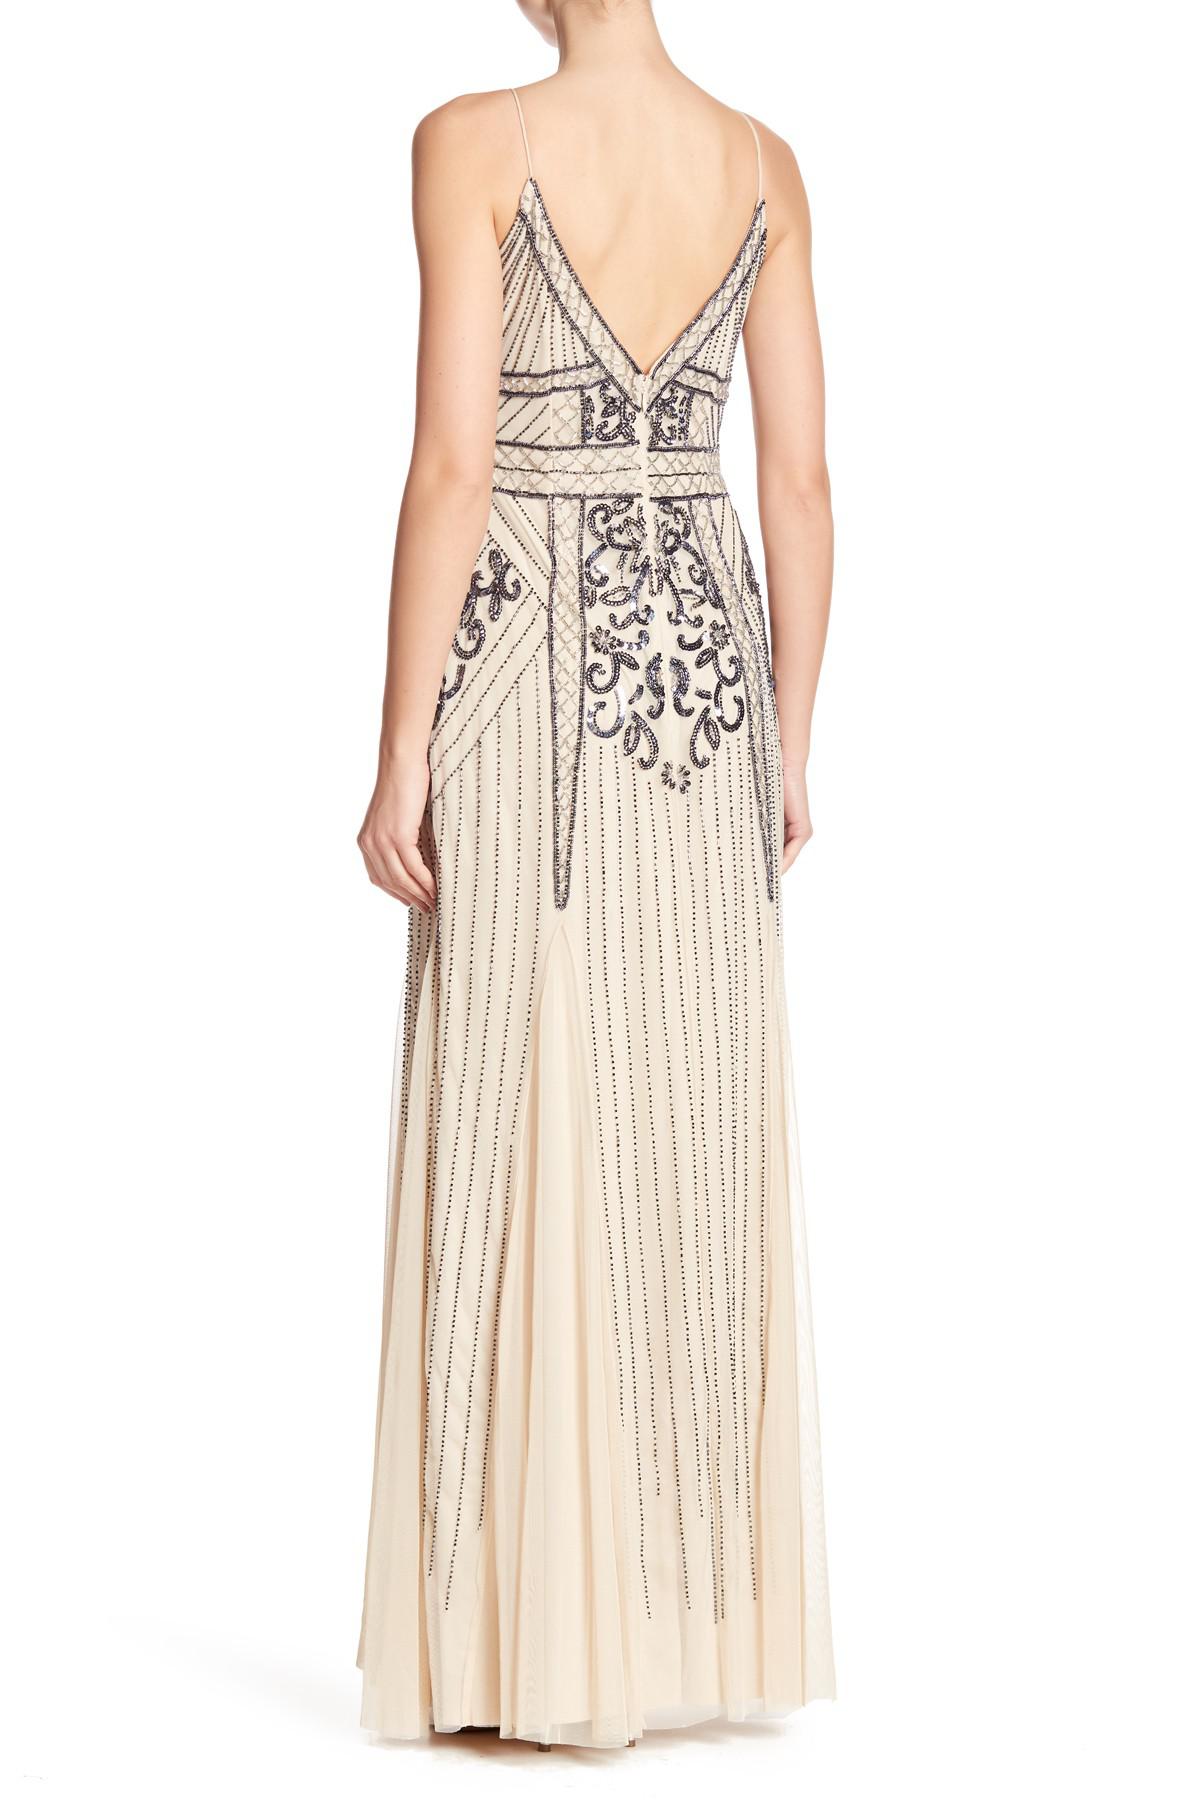 Marina Synthetic Beaded V-neck Gown in ...